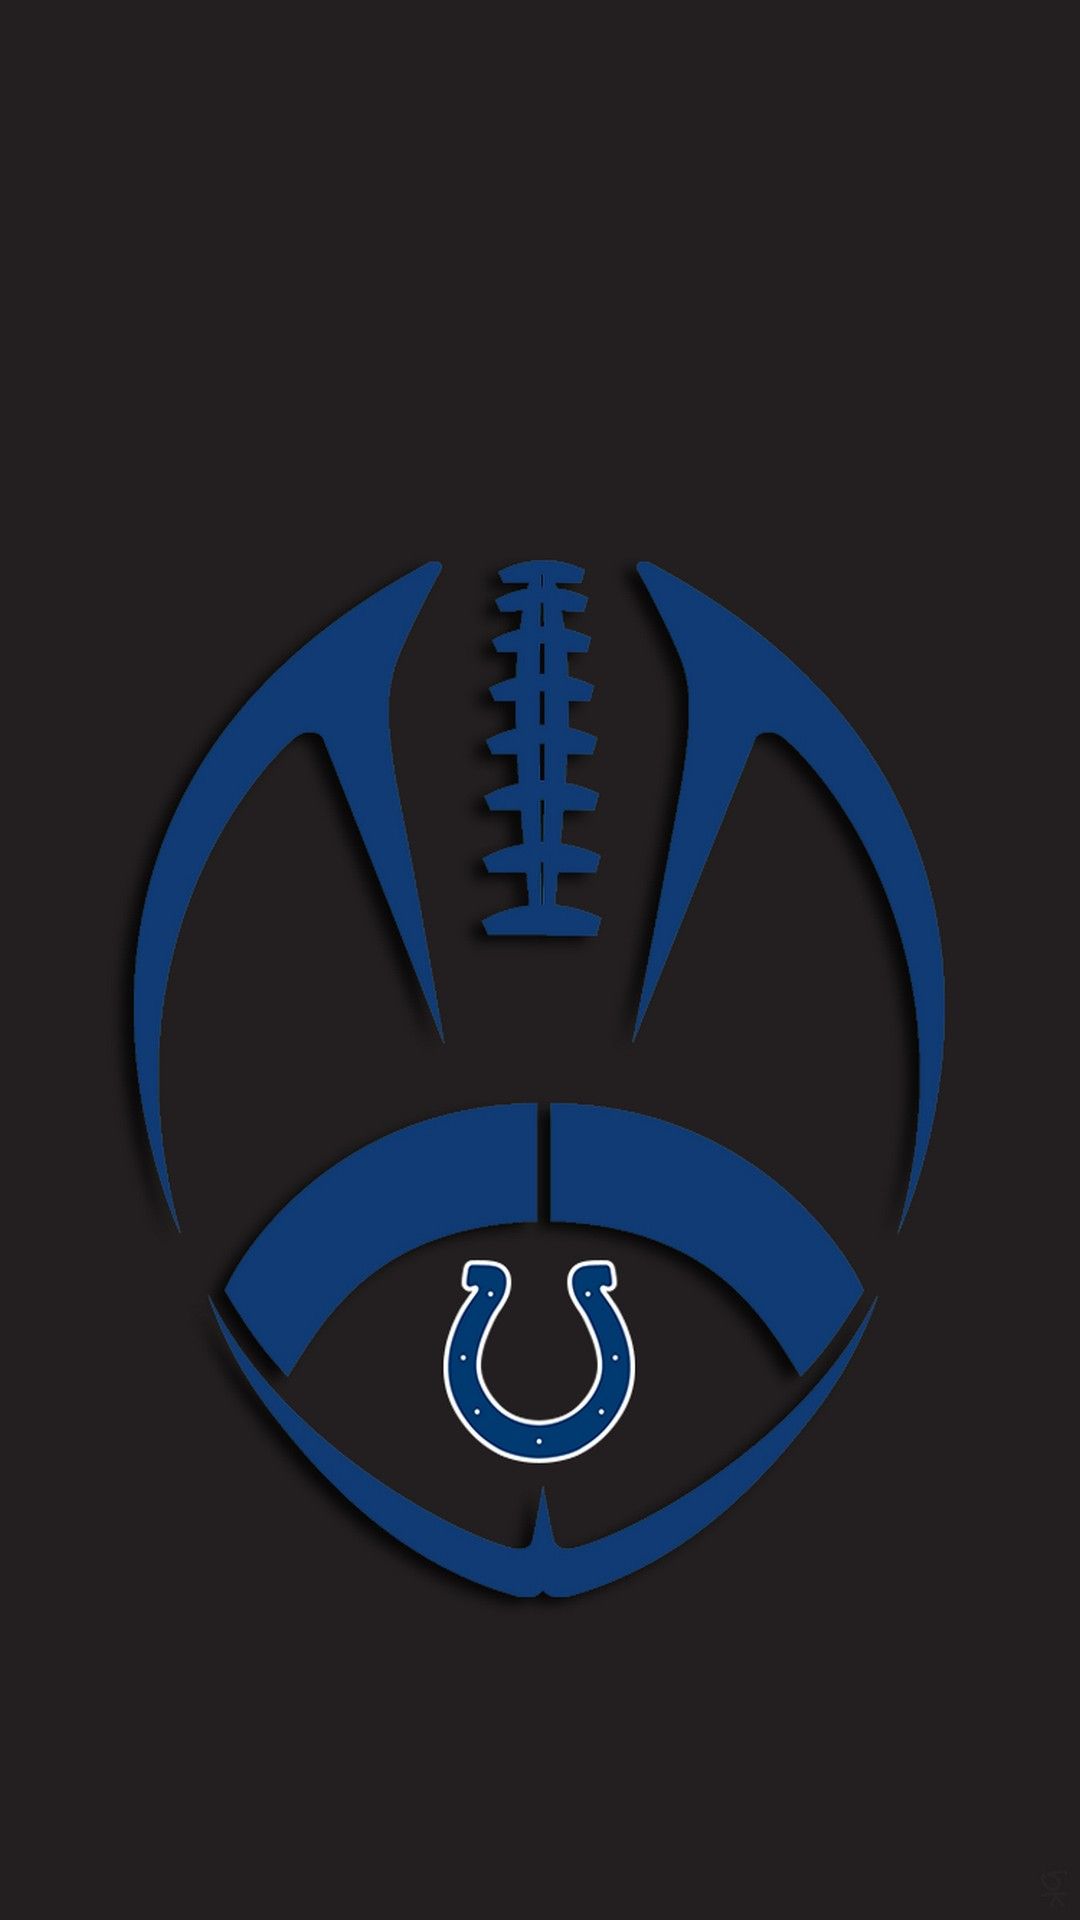 Indianapolis Colts iPhone Wallpaper Size NFL iPhone Wallpaper